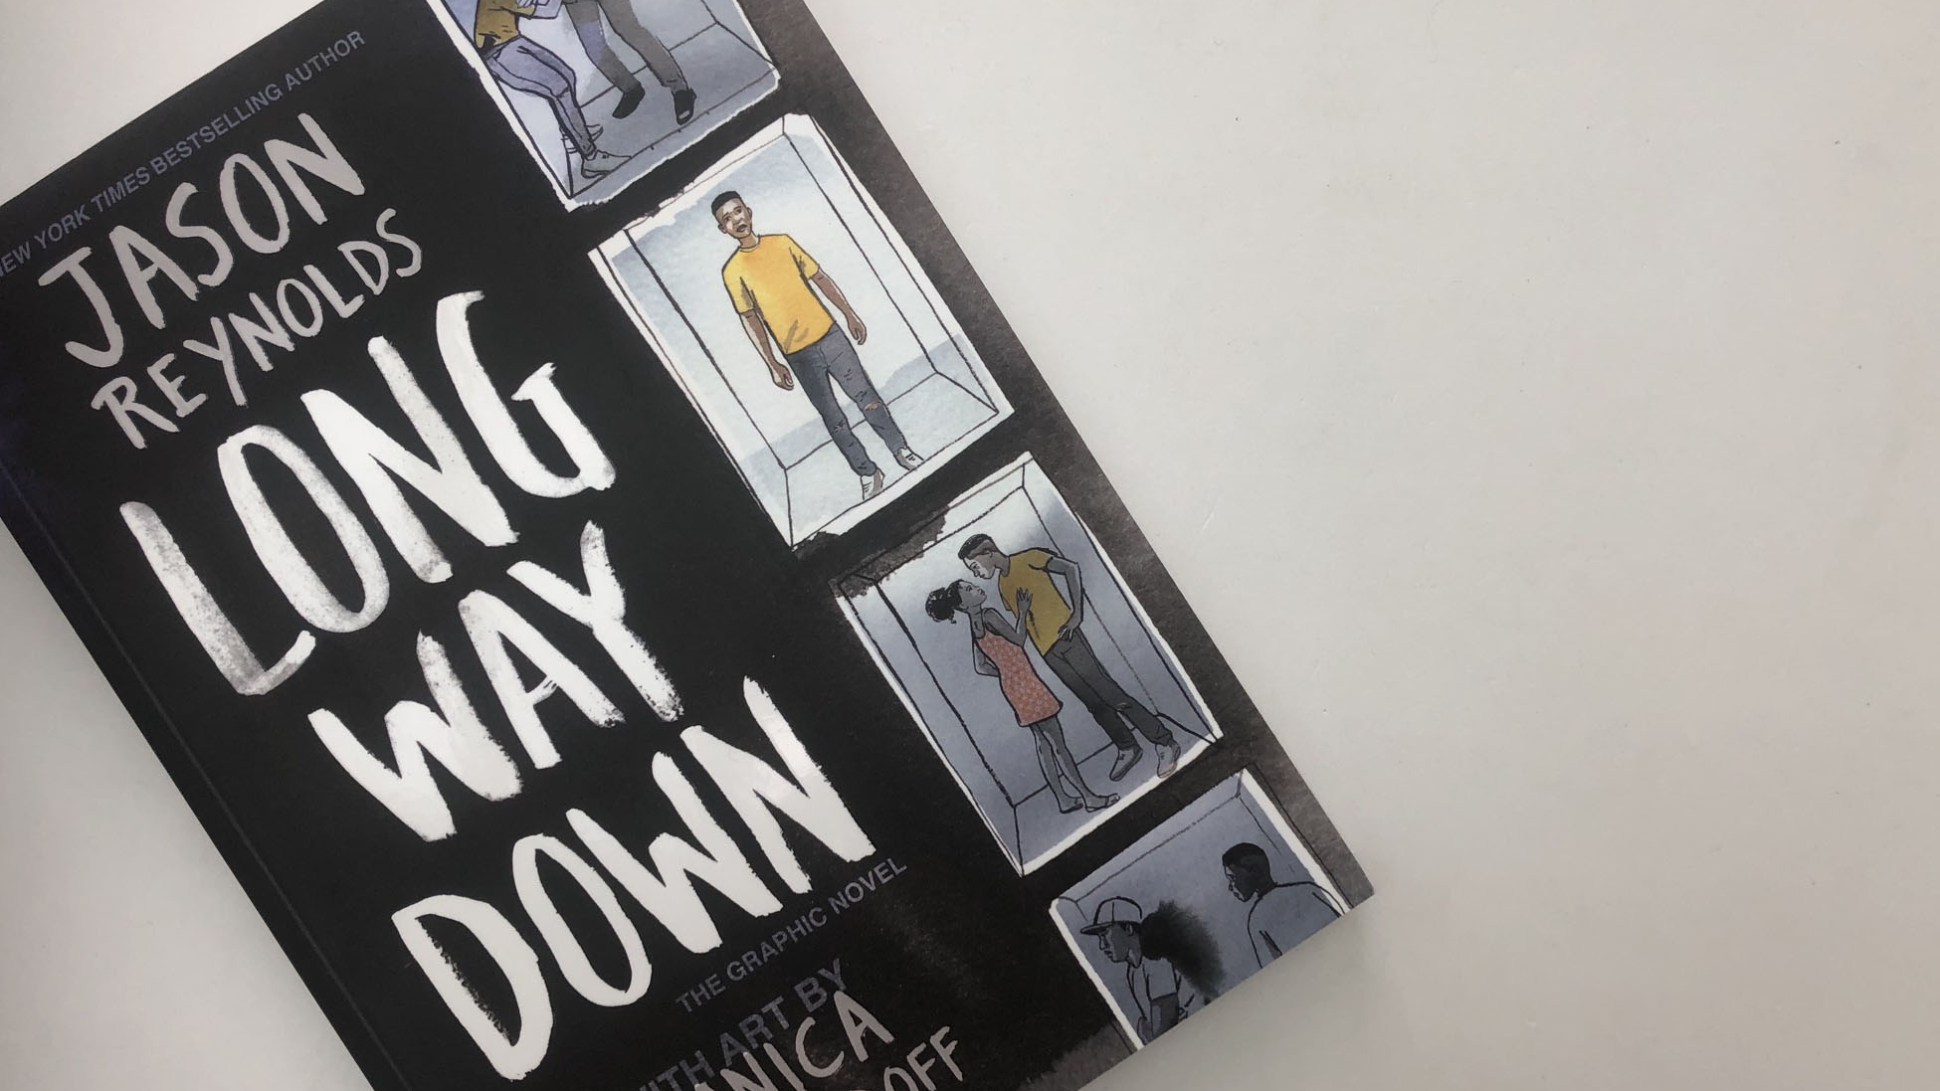 book review on long way down